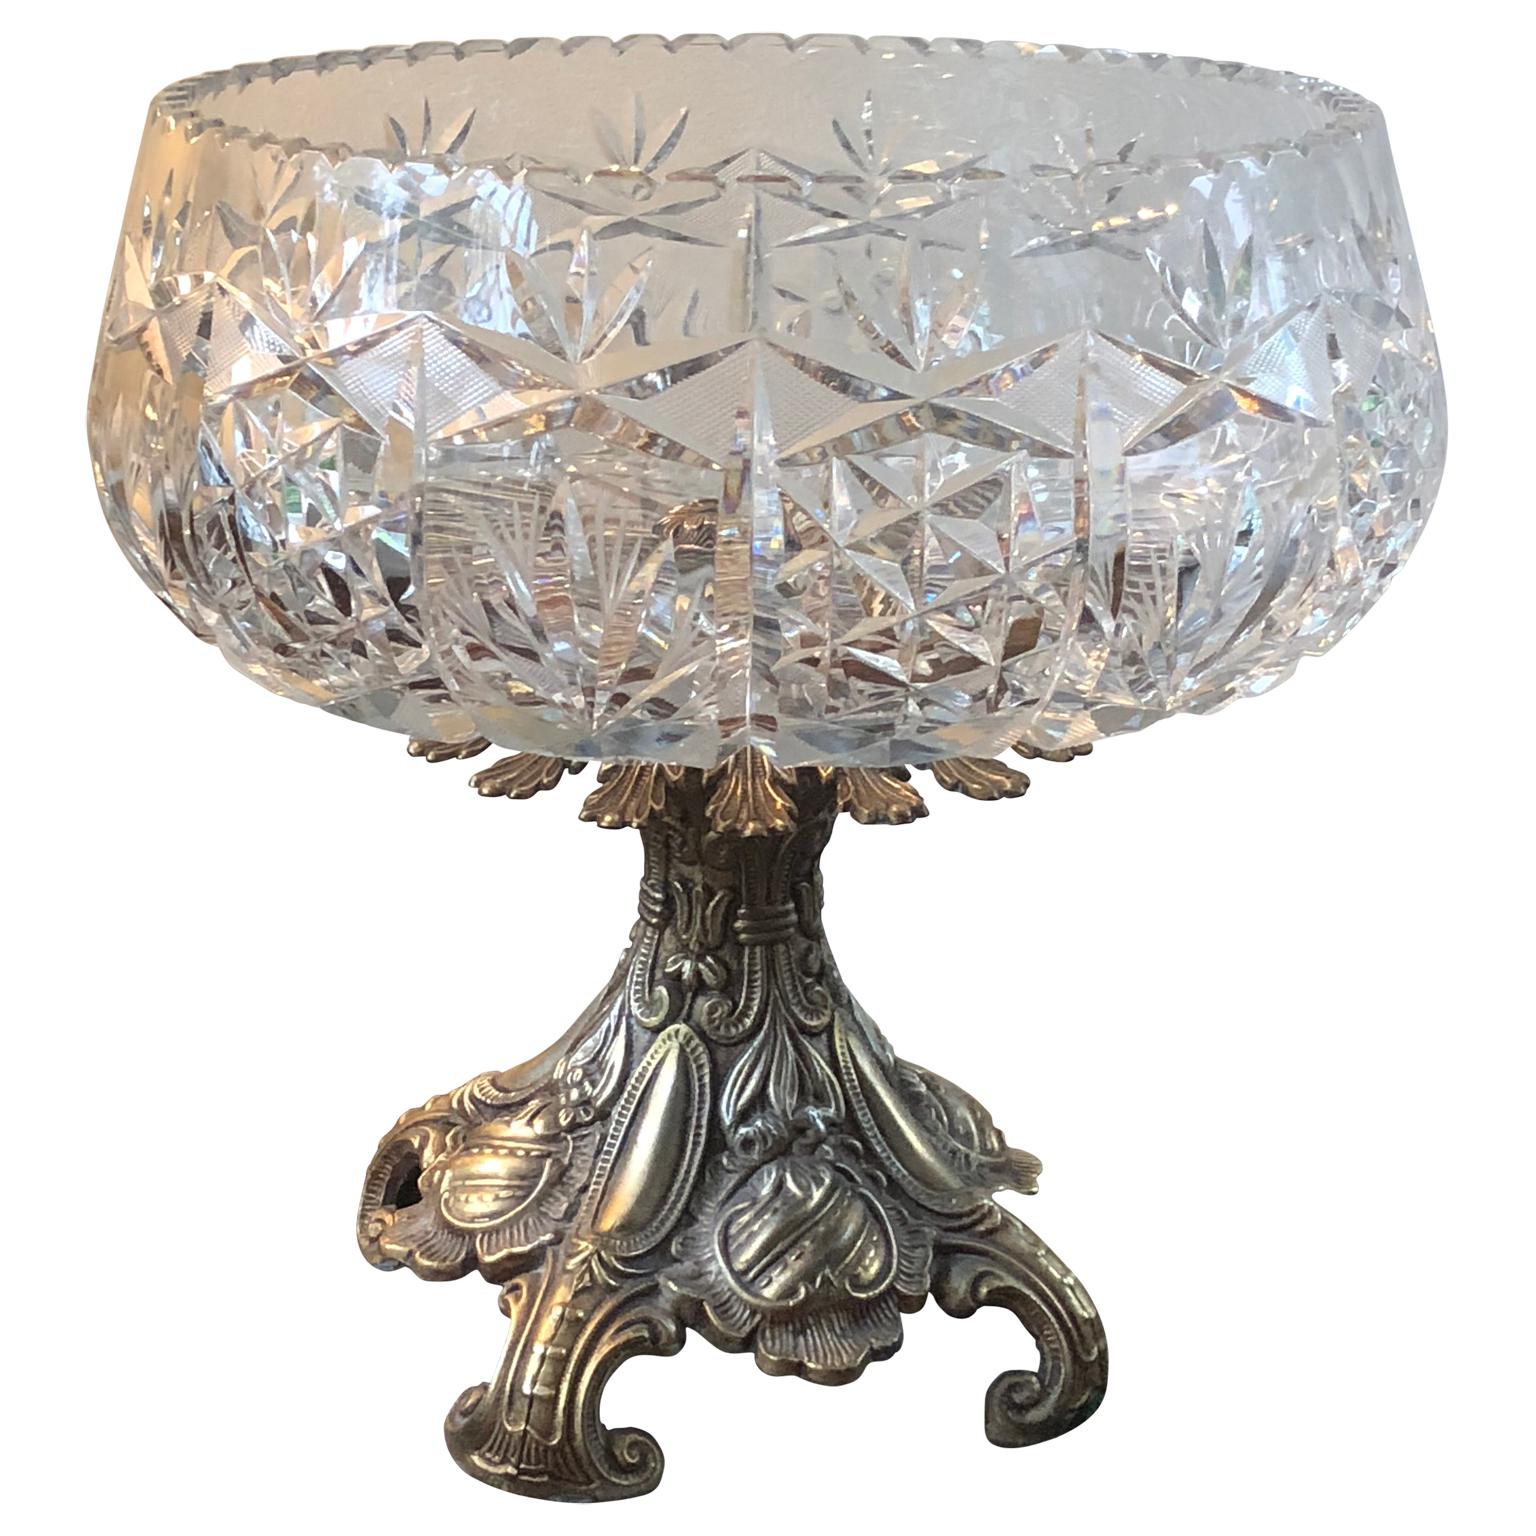 Large Crystal Centerbowl On Rococo-style Bronze Stand